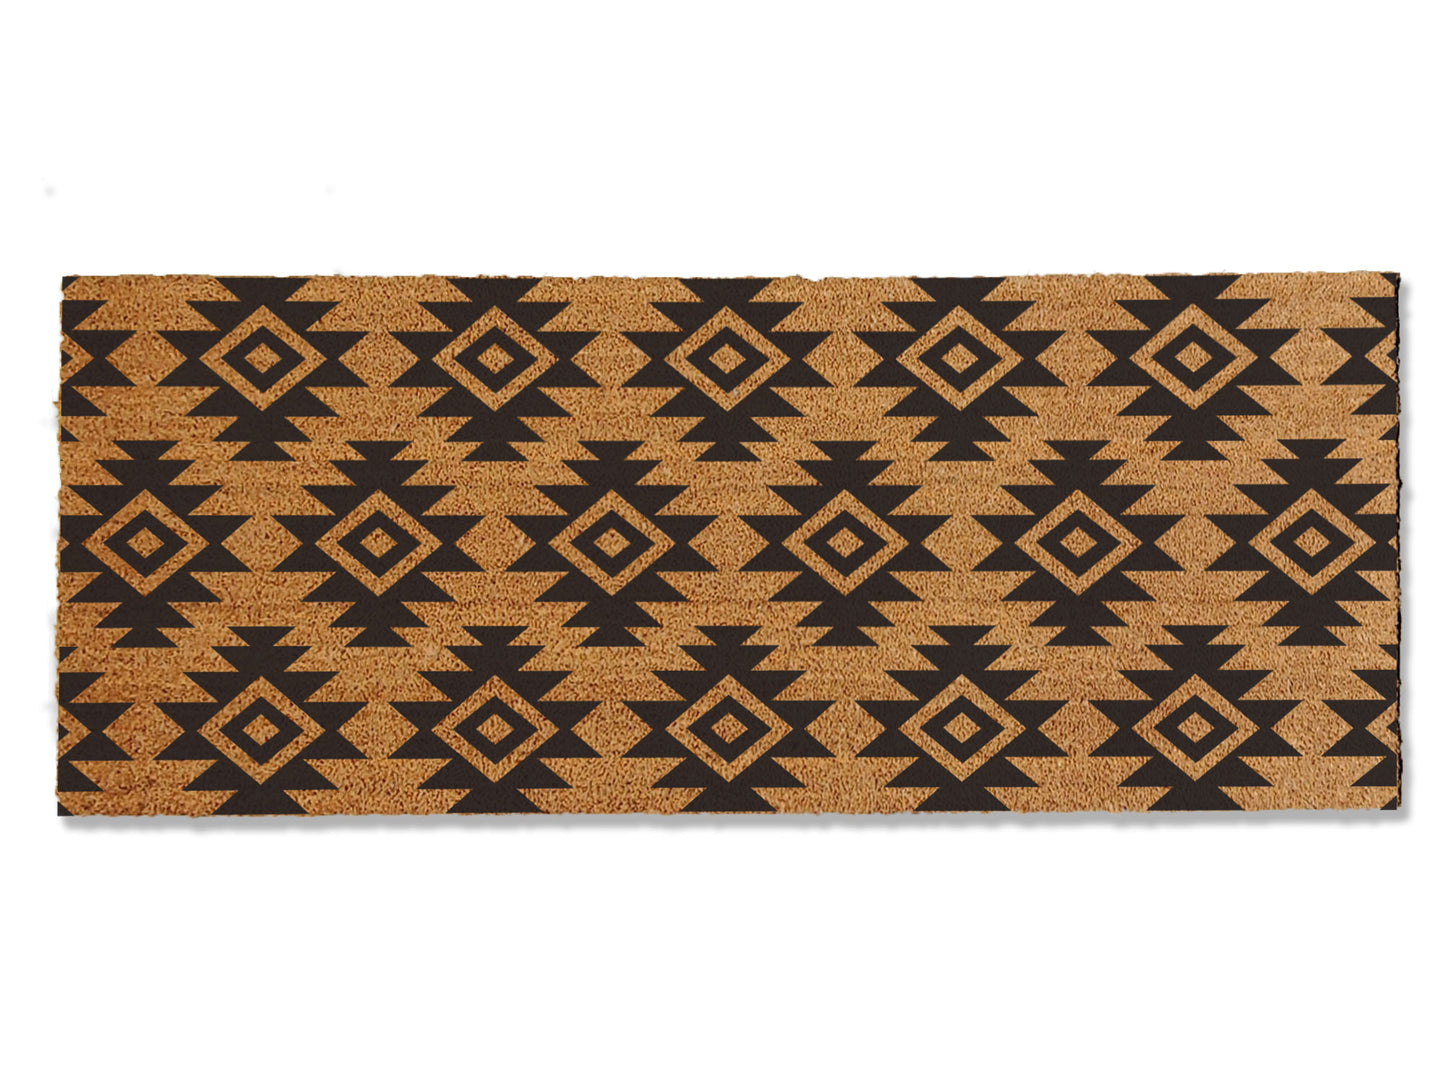 A coir doormat that is 24 inches by 60 inches and has a geometric aztec print painted on it.